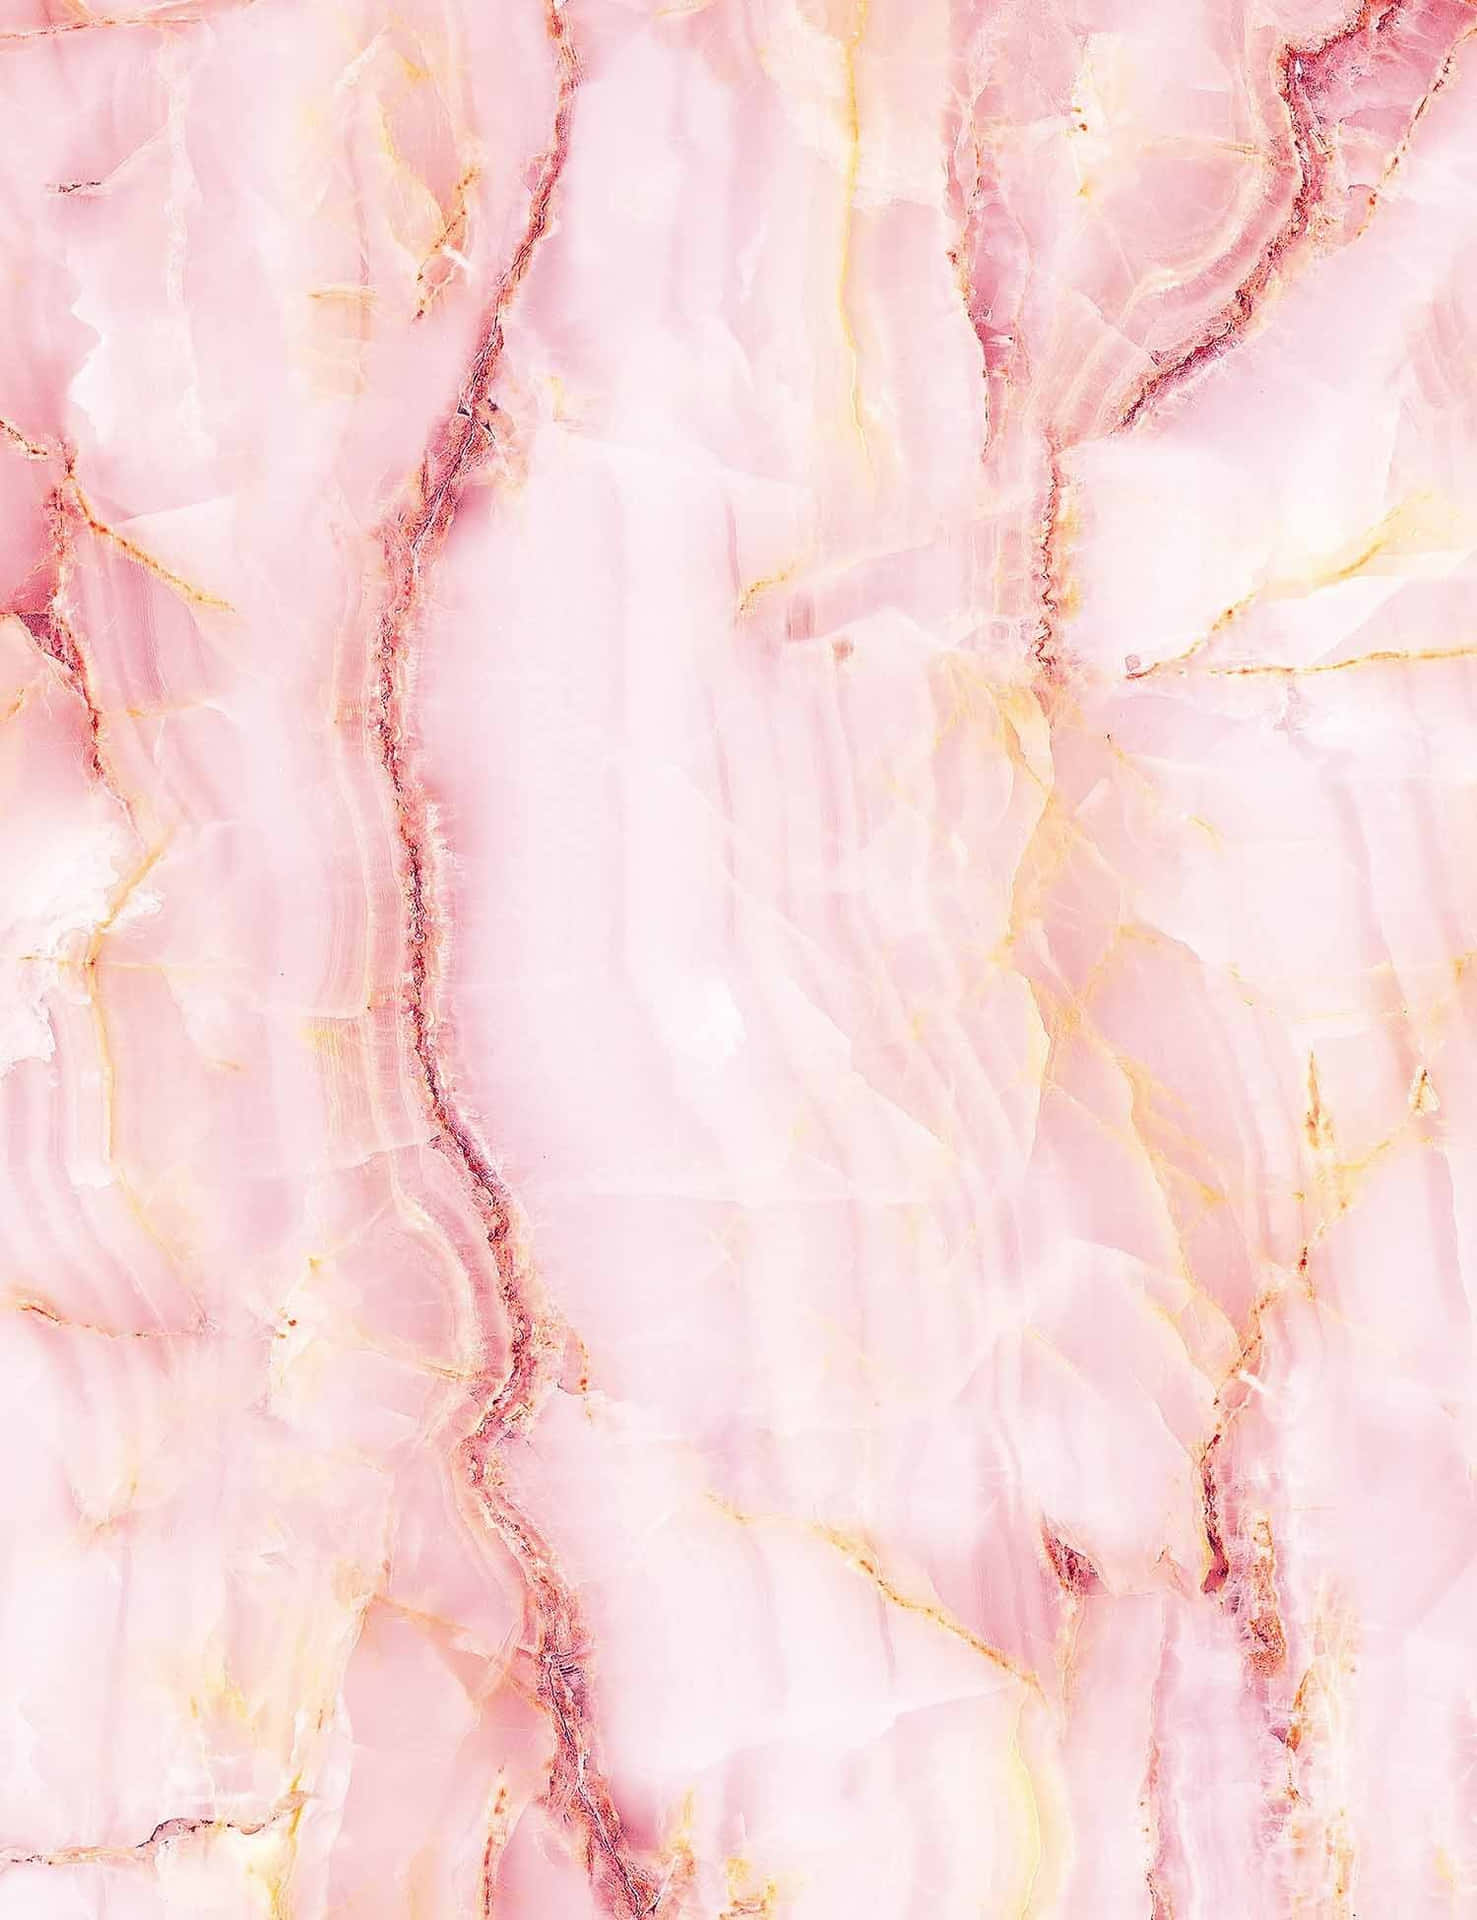 "Dreamy and Soft Pink Texture"